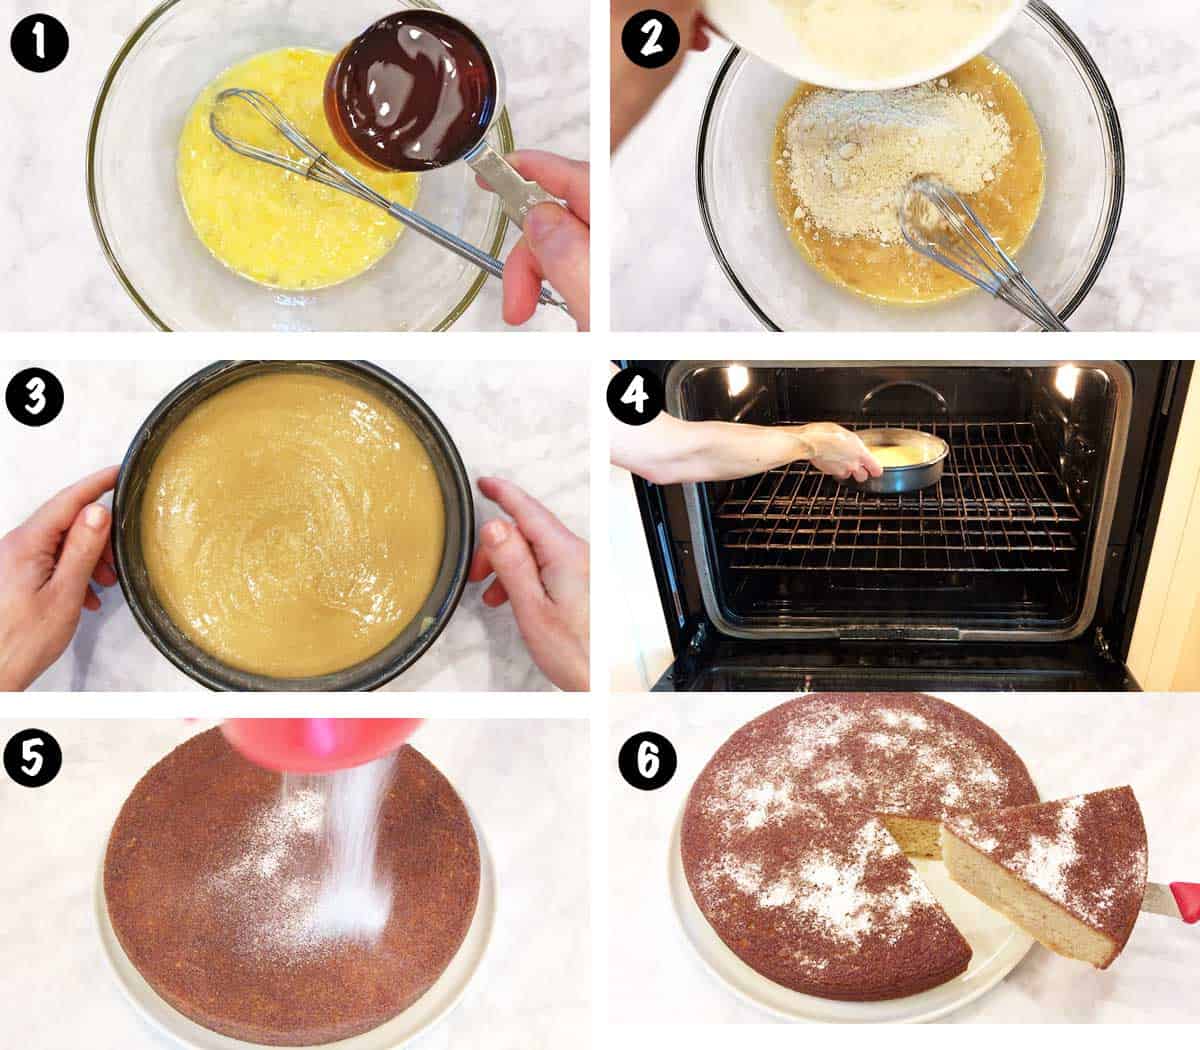 A six-photo collage showing the steps for baking an almond flour cake. 